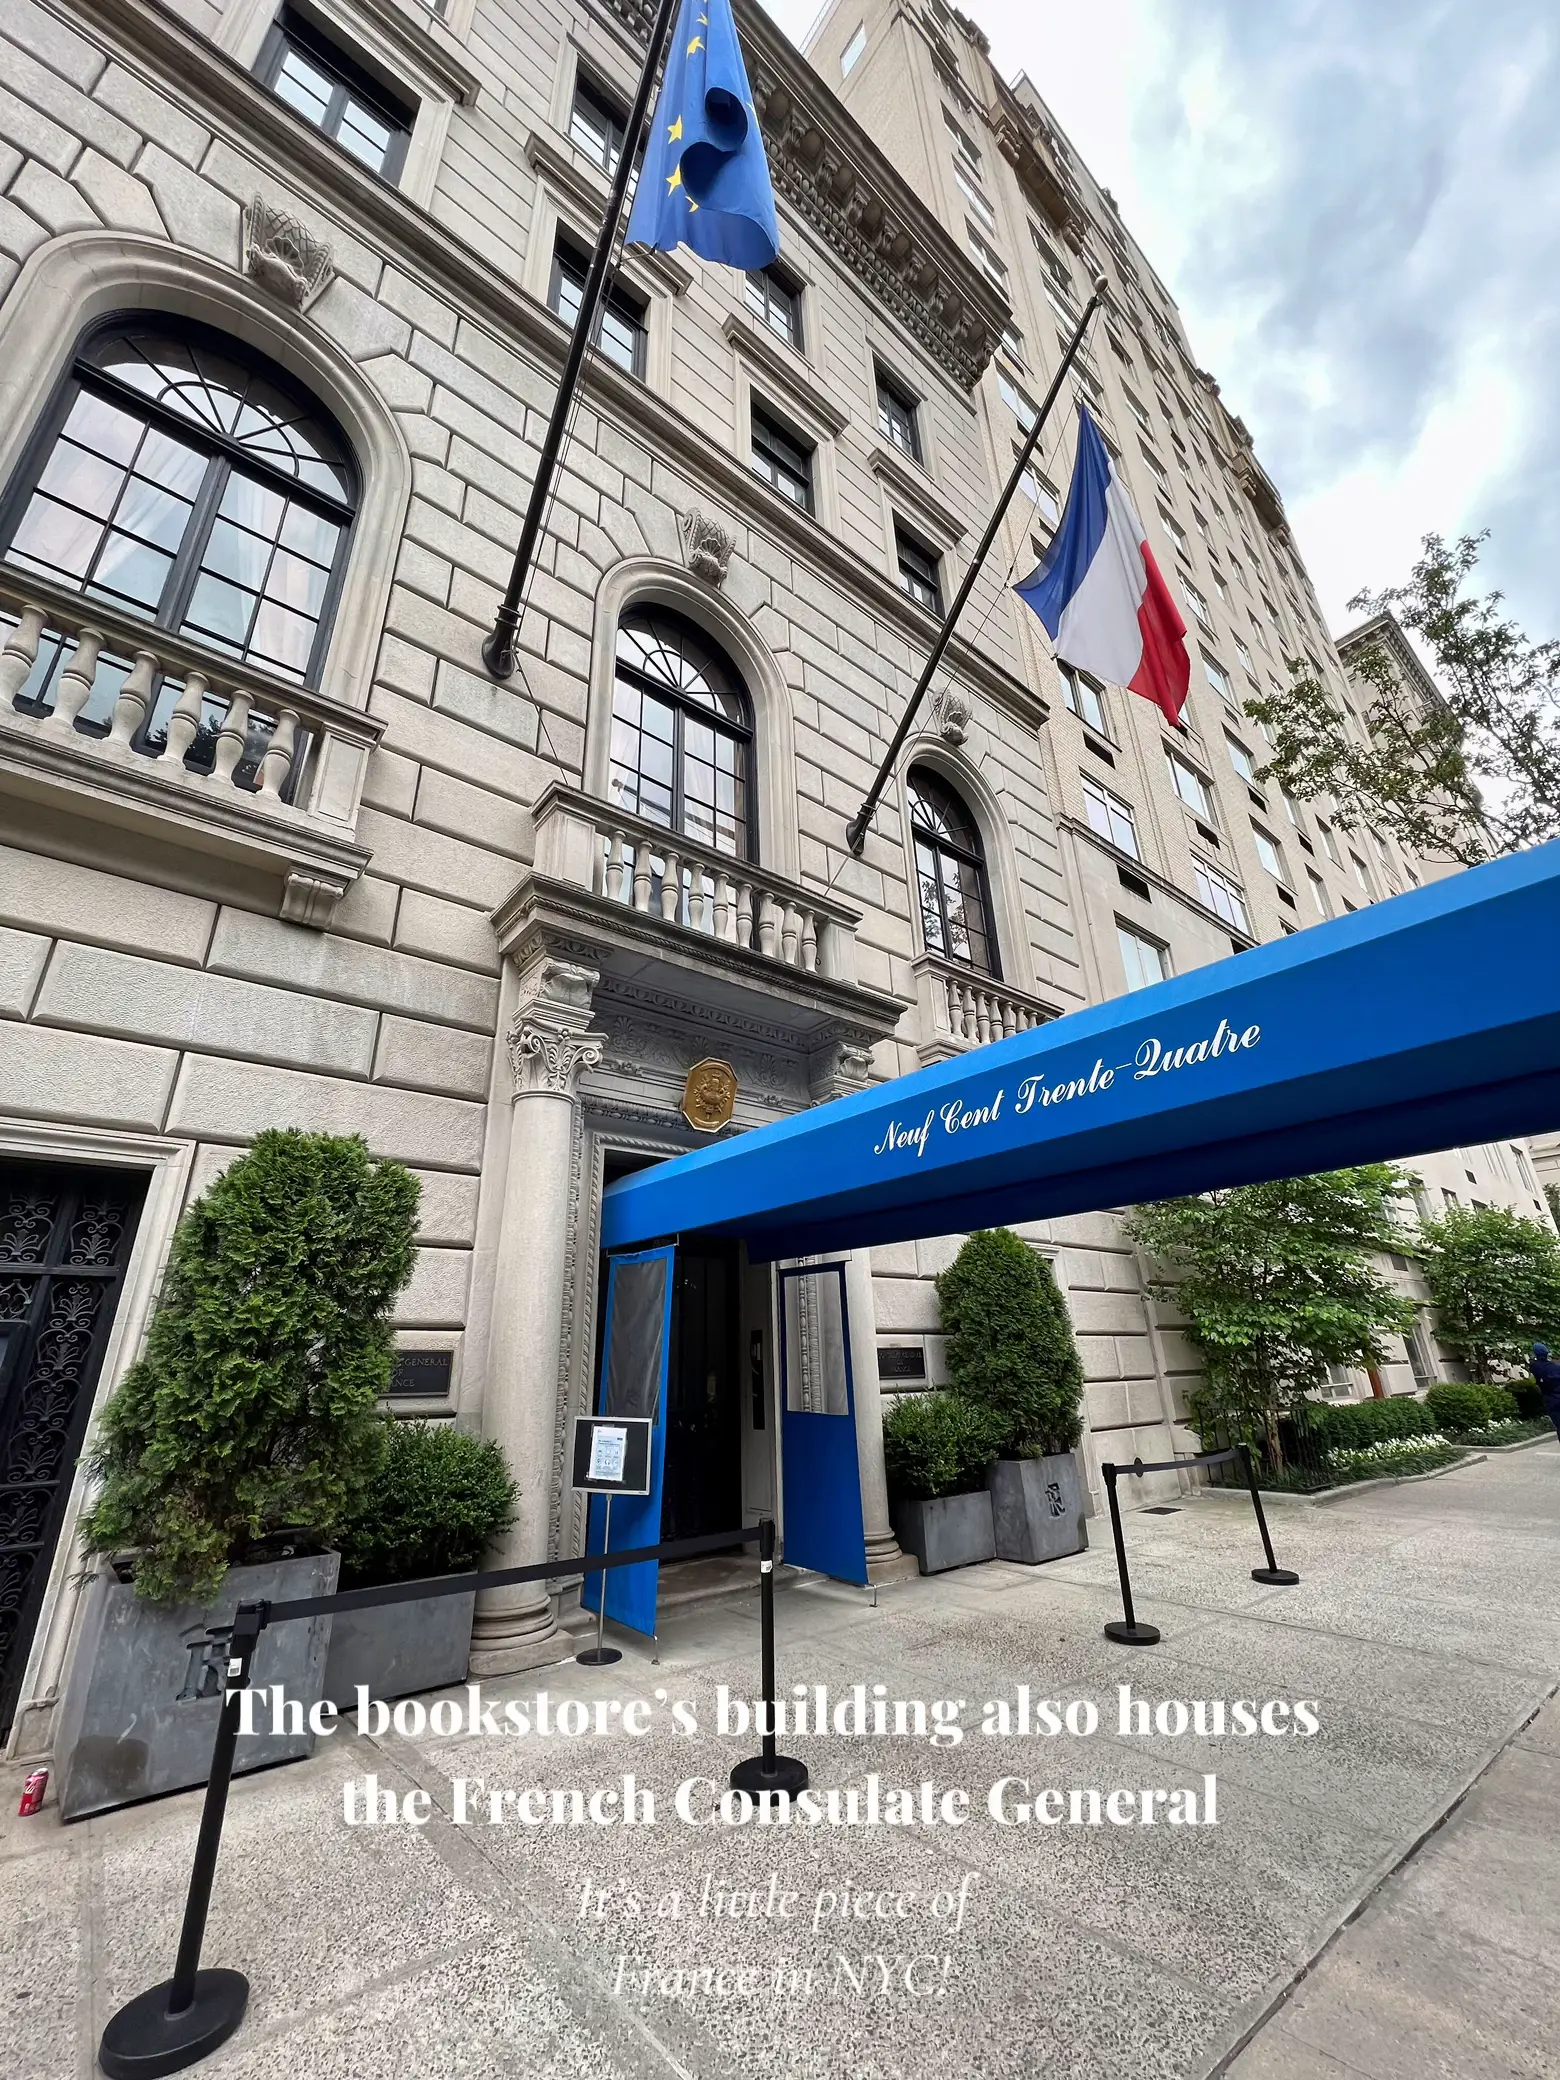  The bookstore's building also houses the French Consulate General.